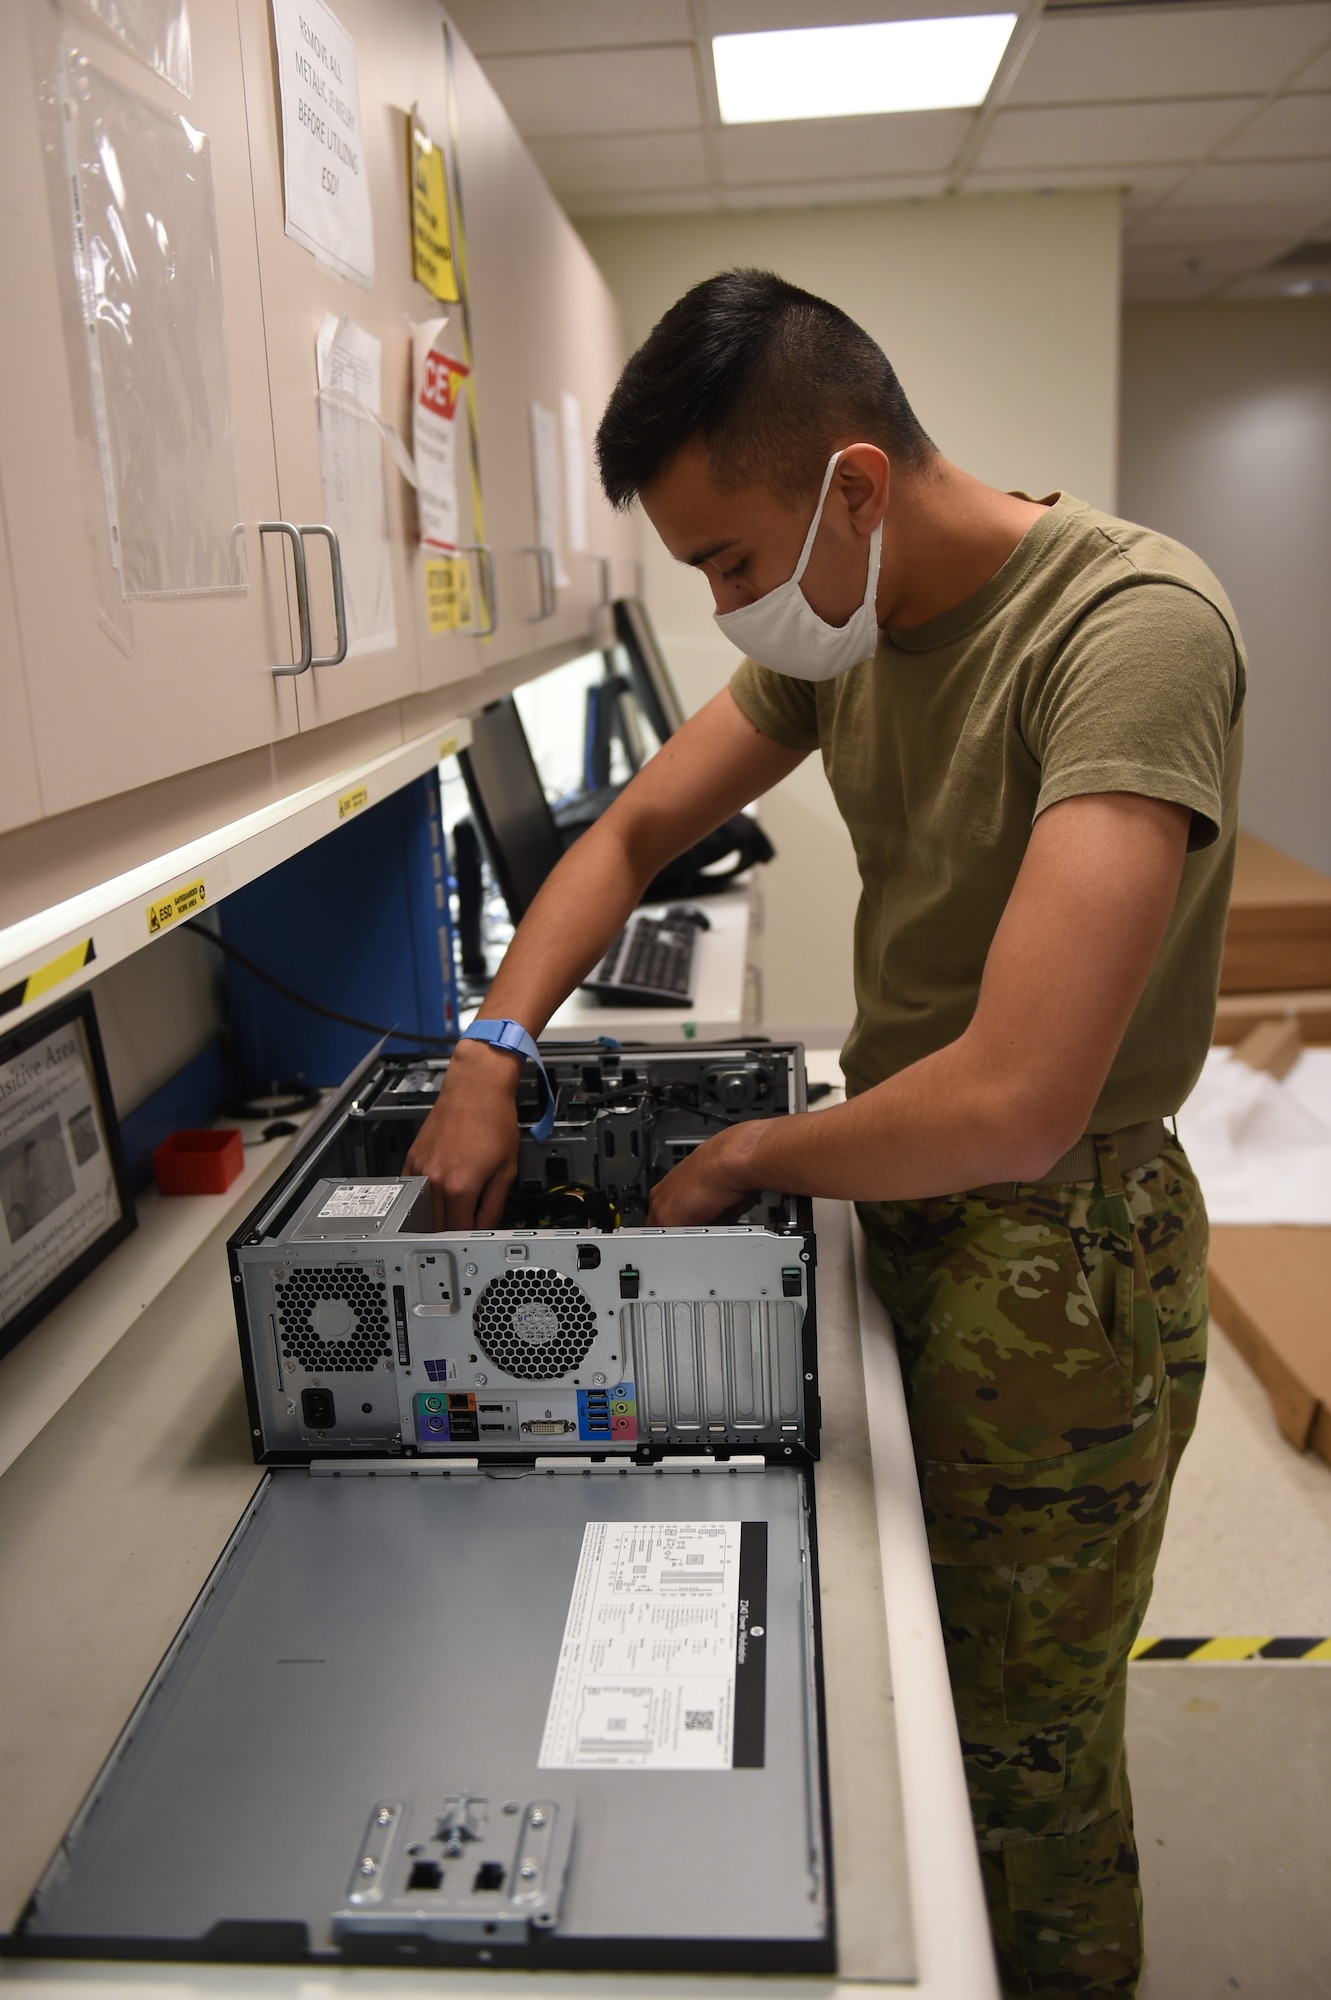 Airman Daniel Artrip, 627th Communications Squadron client systems technician, disassembles a computer on Joint Base Lewis-McChord, Wash., Oct. 22, 2020. The 627th CS is responsible for Team McChord’s internet network systems. (U.S. Air Force photo by Airman 1st Class Mikayla Heineck)